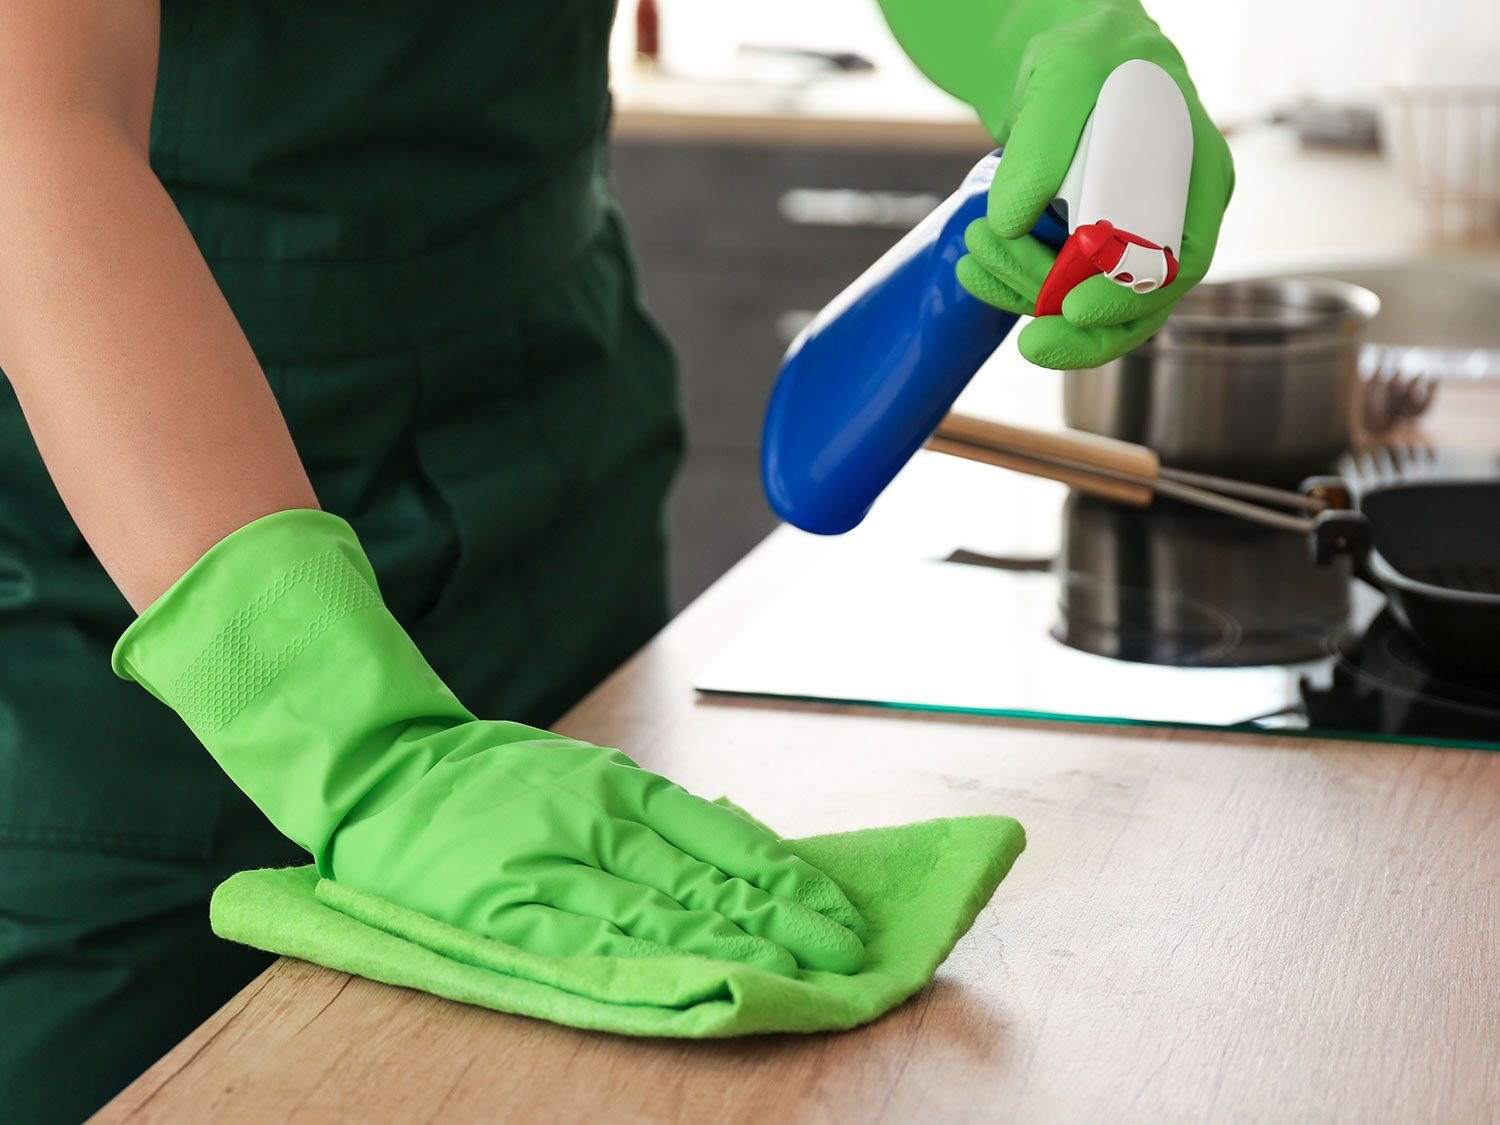 How to Clean Your Kitchen Countertops to Prevent the Spread of Germs